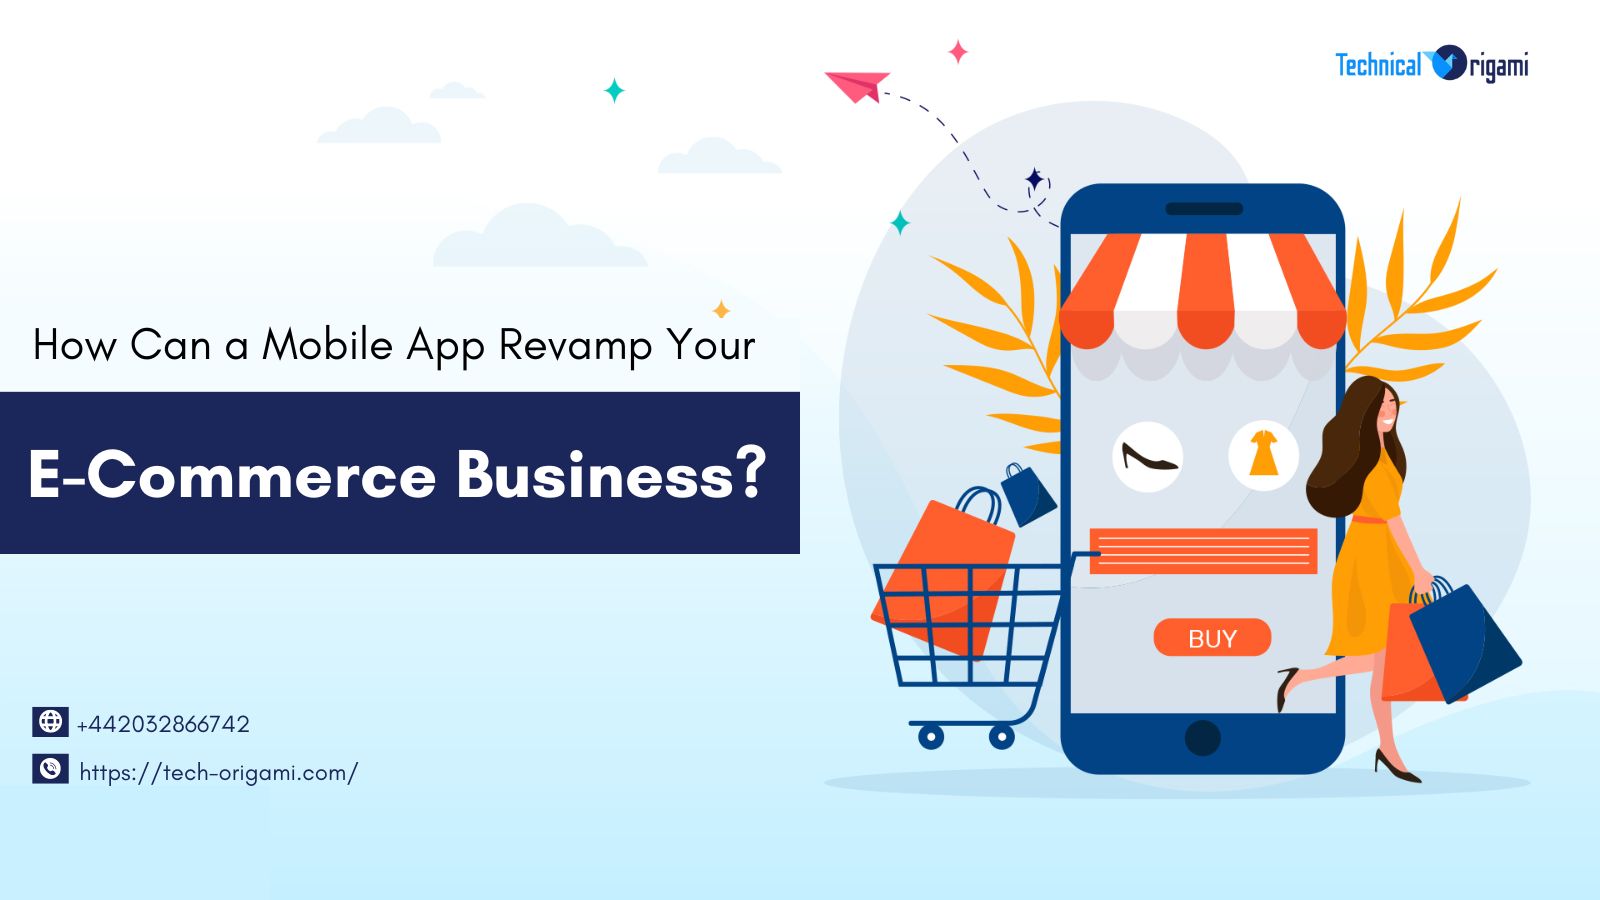 How Can a Mobile App Revamp Your E-Commerce Business?